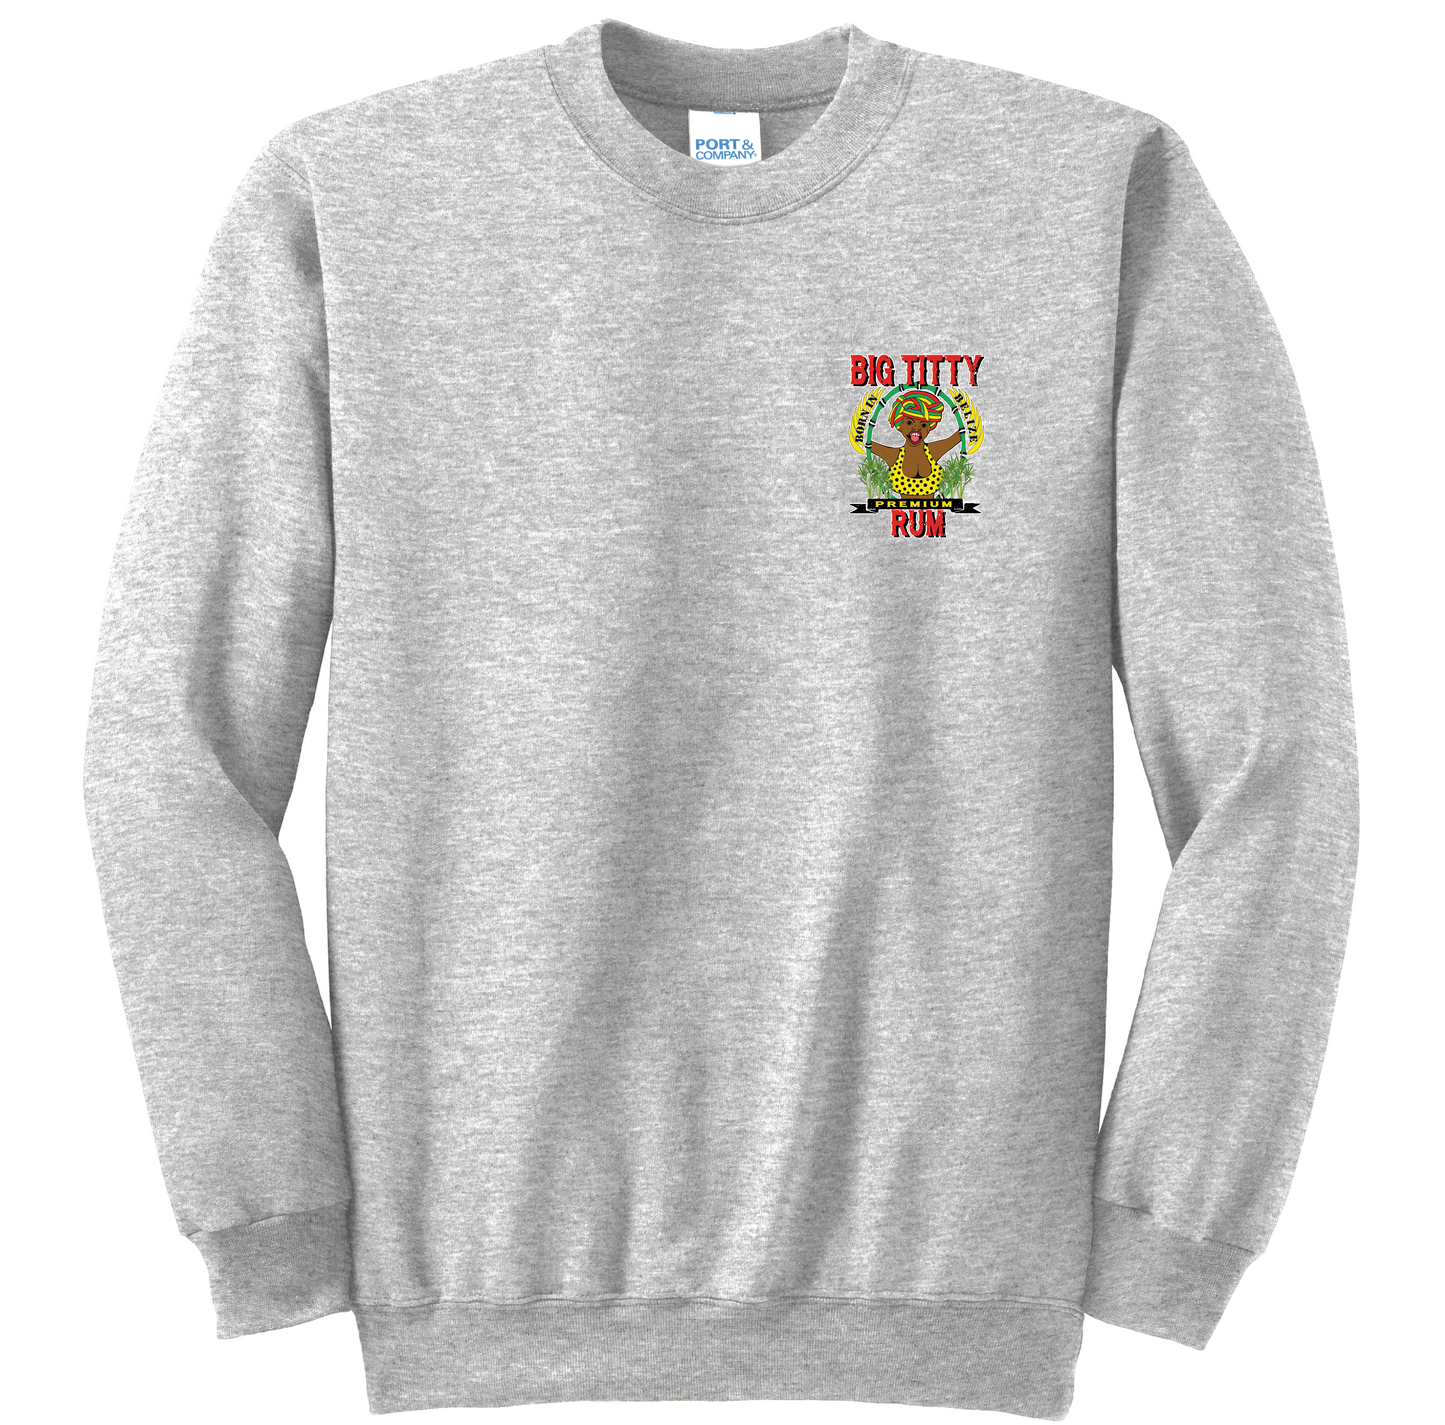 Big Titty Rum Crewneck - Small logo on front and large on back